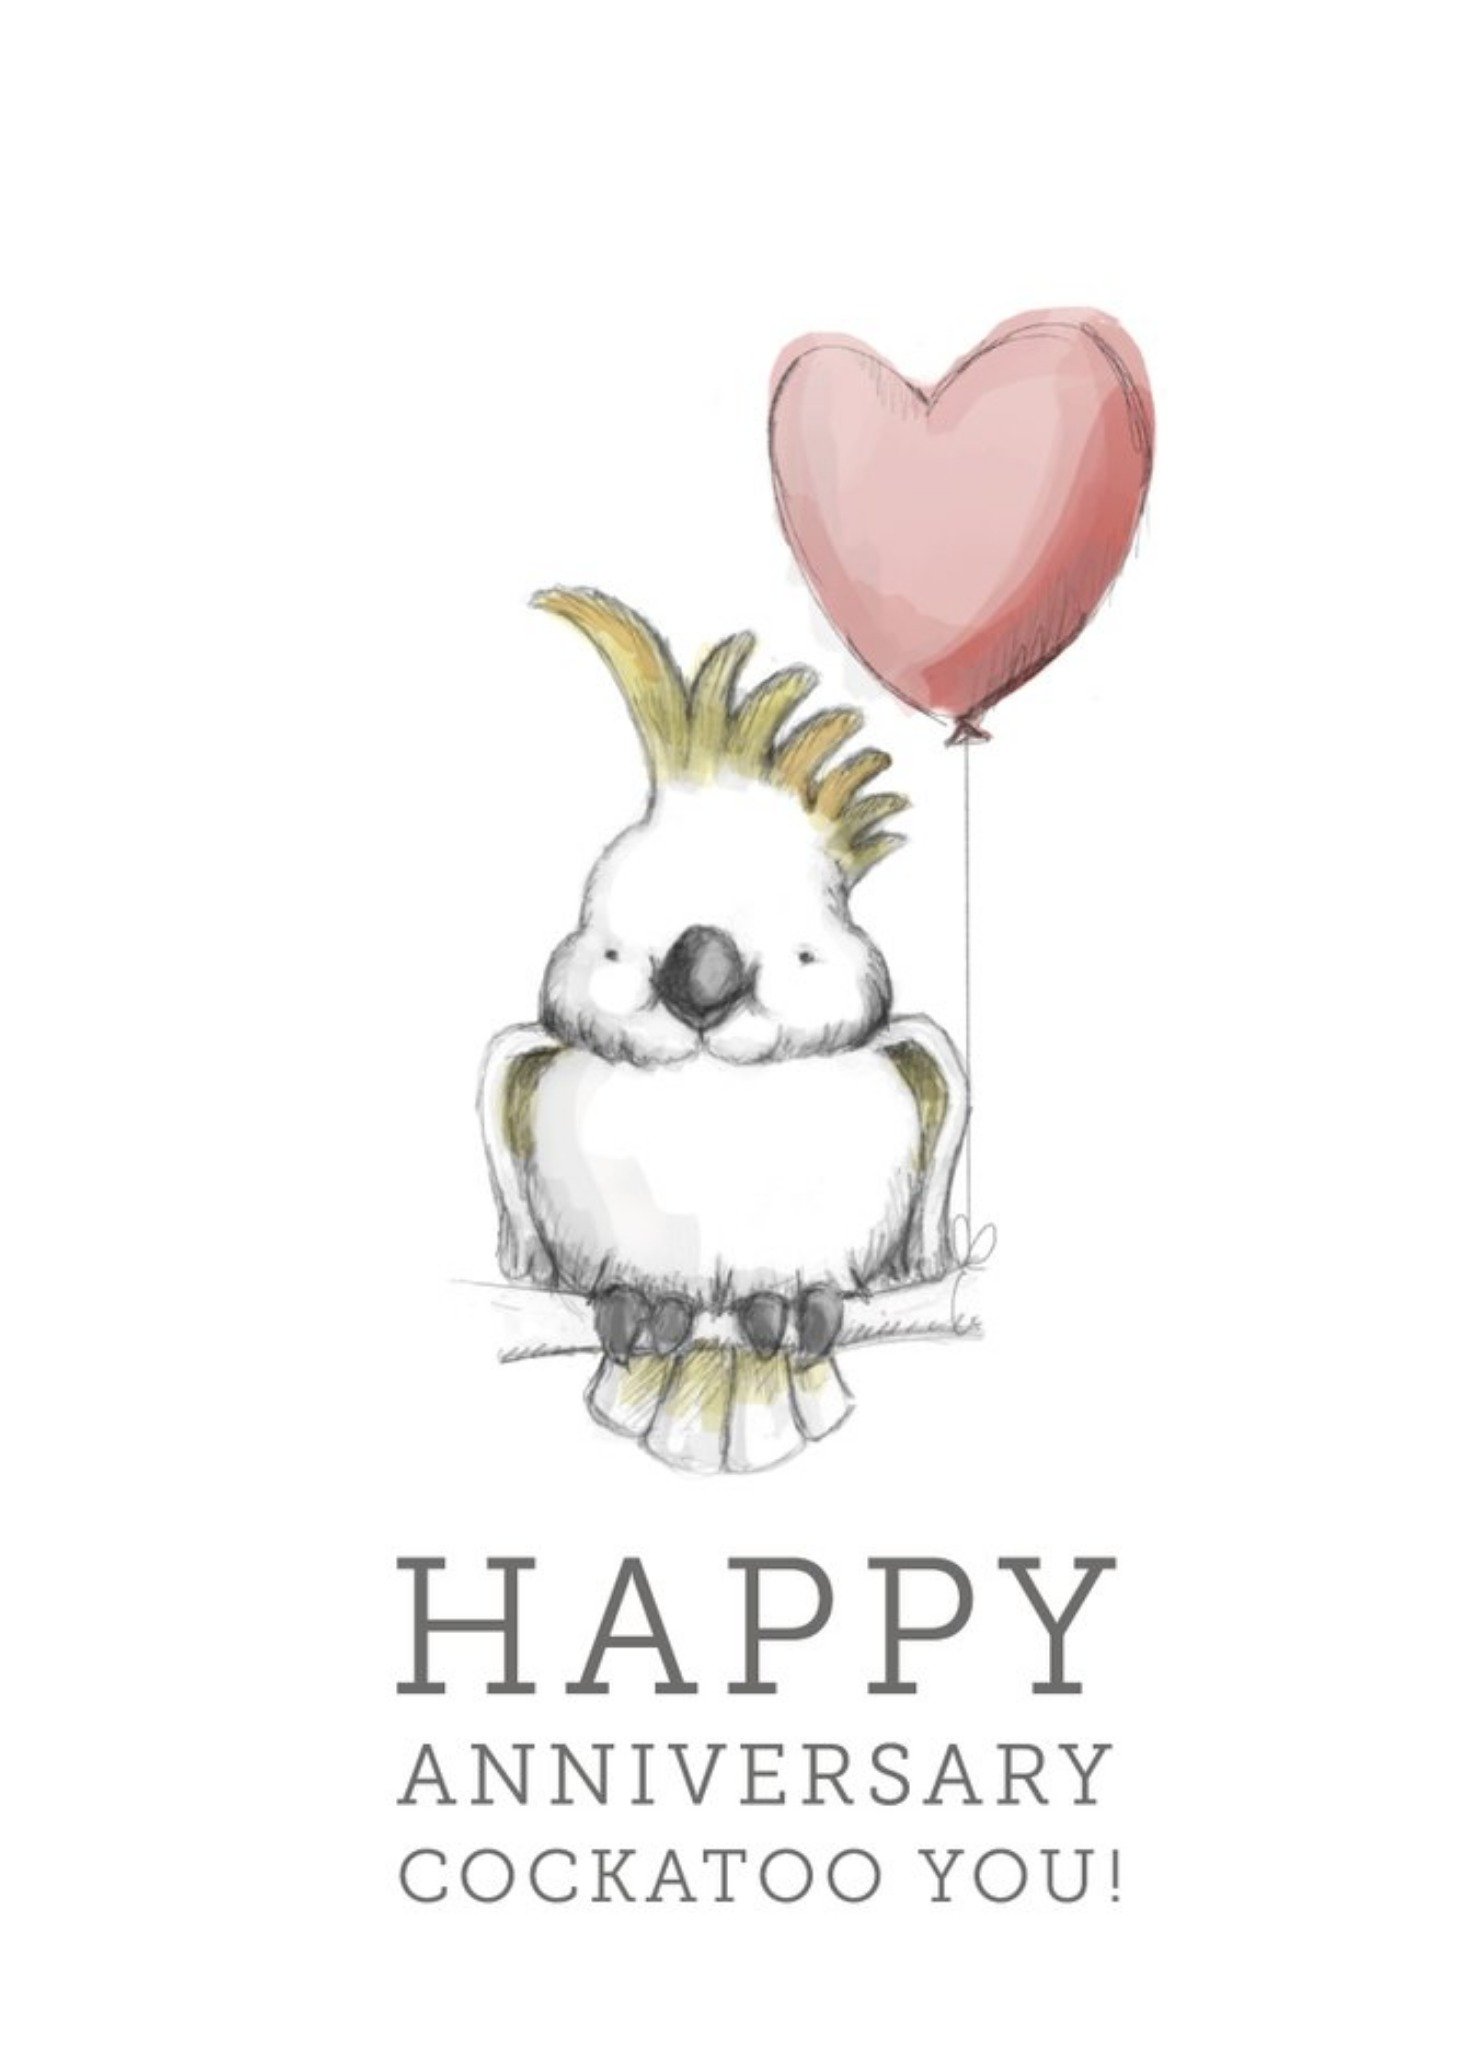 Moonpig Illustration Of A Pair Of Cockatoos With Heart Shaped Balloons Anniversary Card Ecard